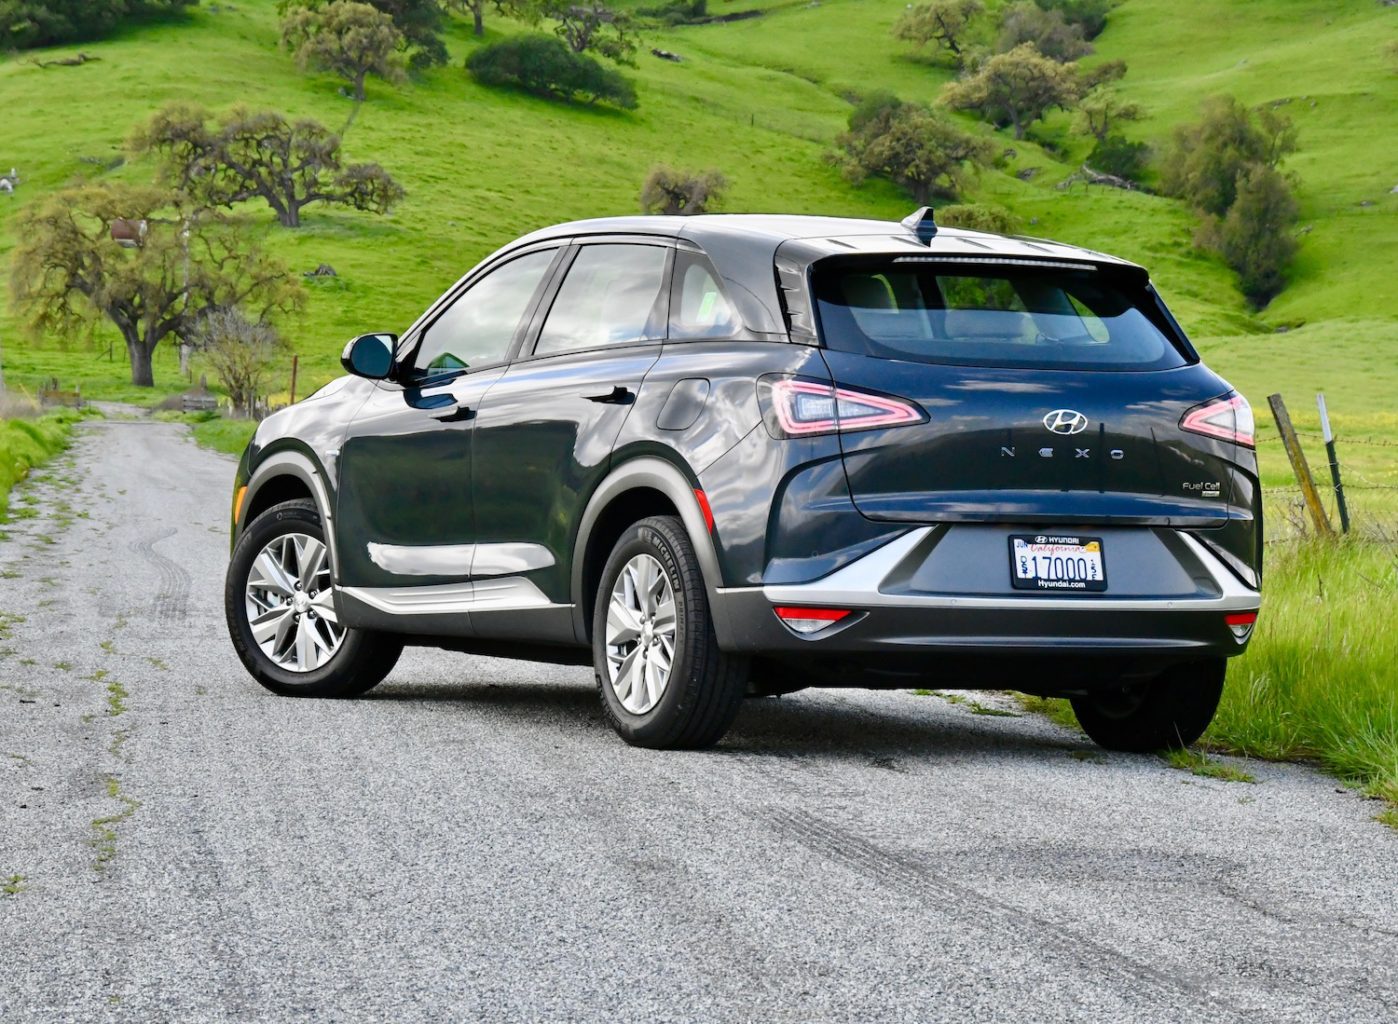 The 2019 Hyundai Nexo is a bespoke unicorn of a vehicle as it is only available in the United States at three Hyundai dealers in California